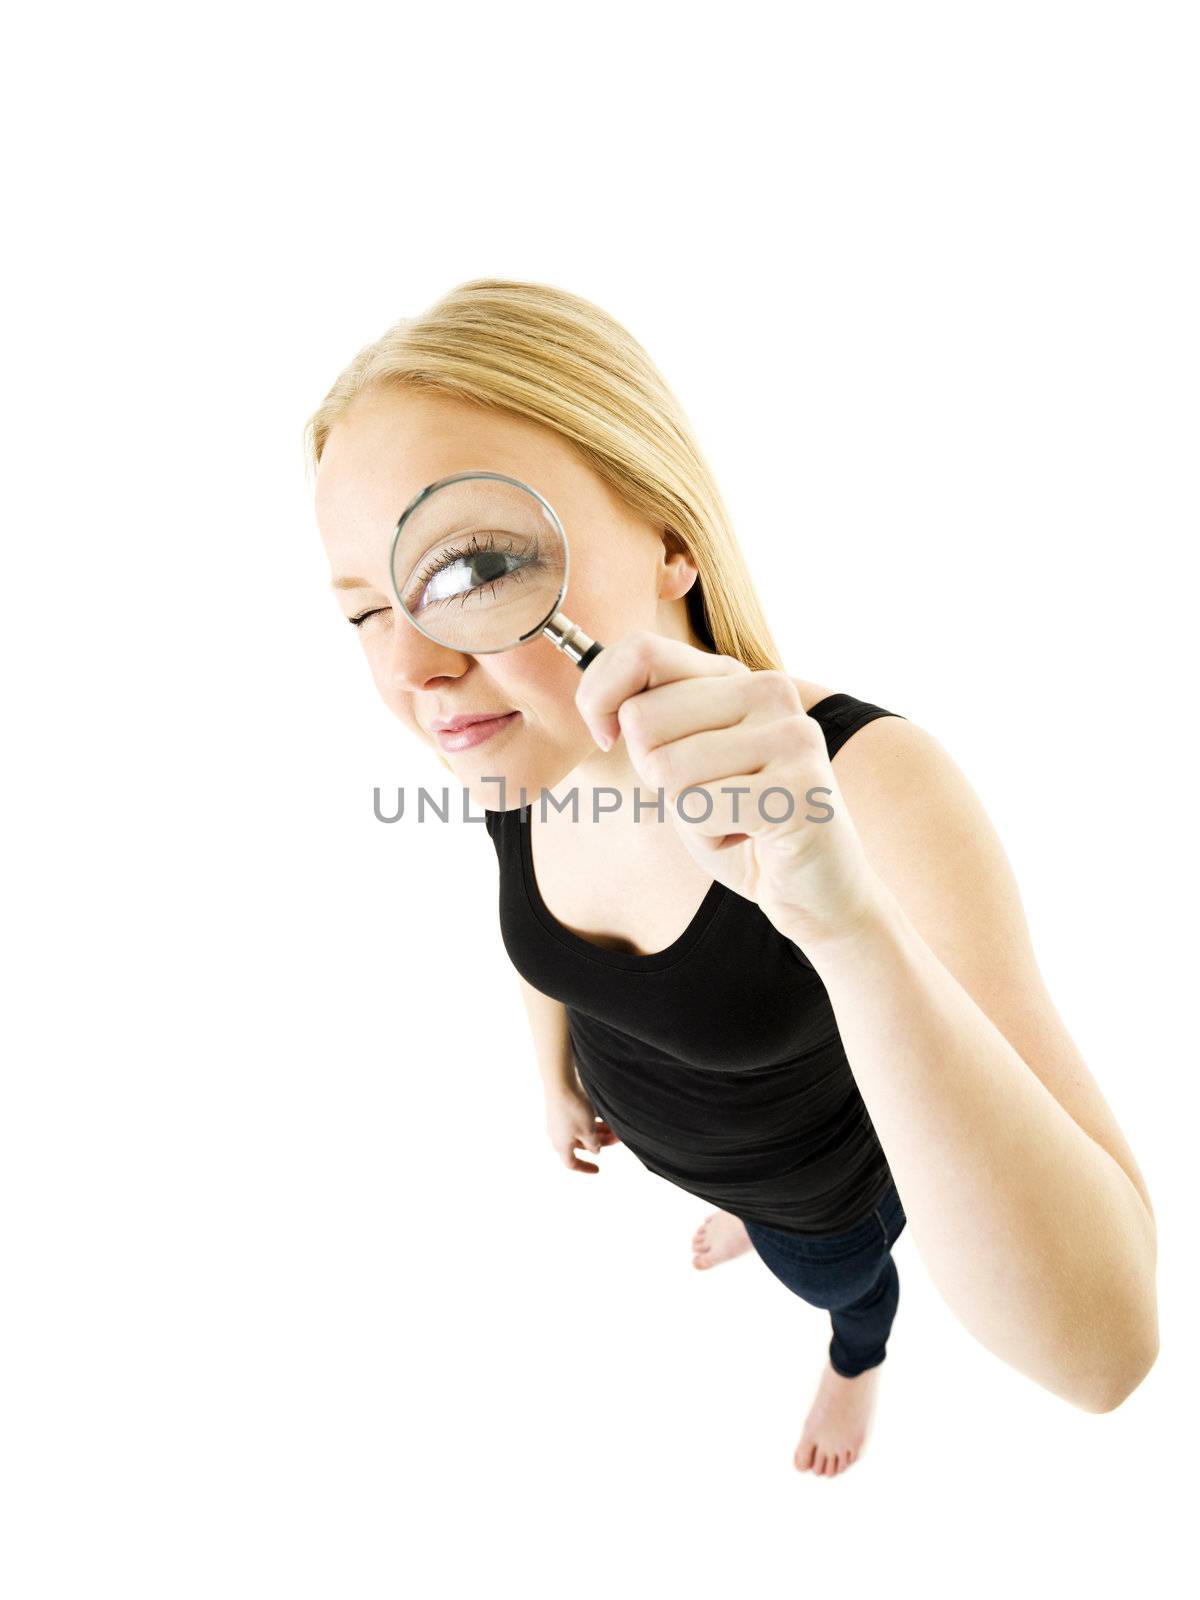 Girl with a Magnifying Glass in front of her eye